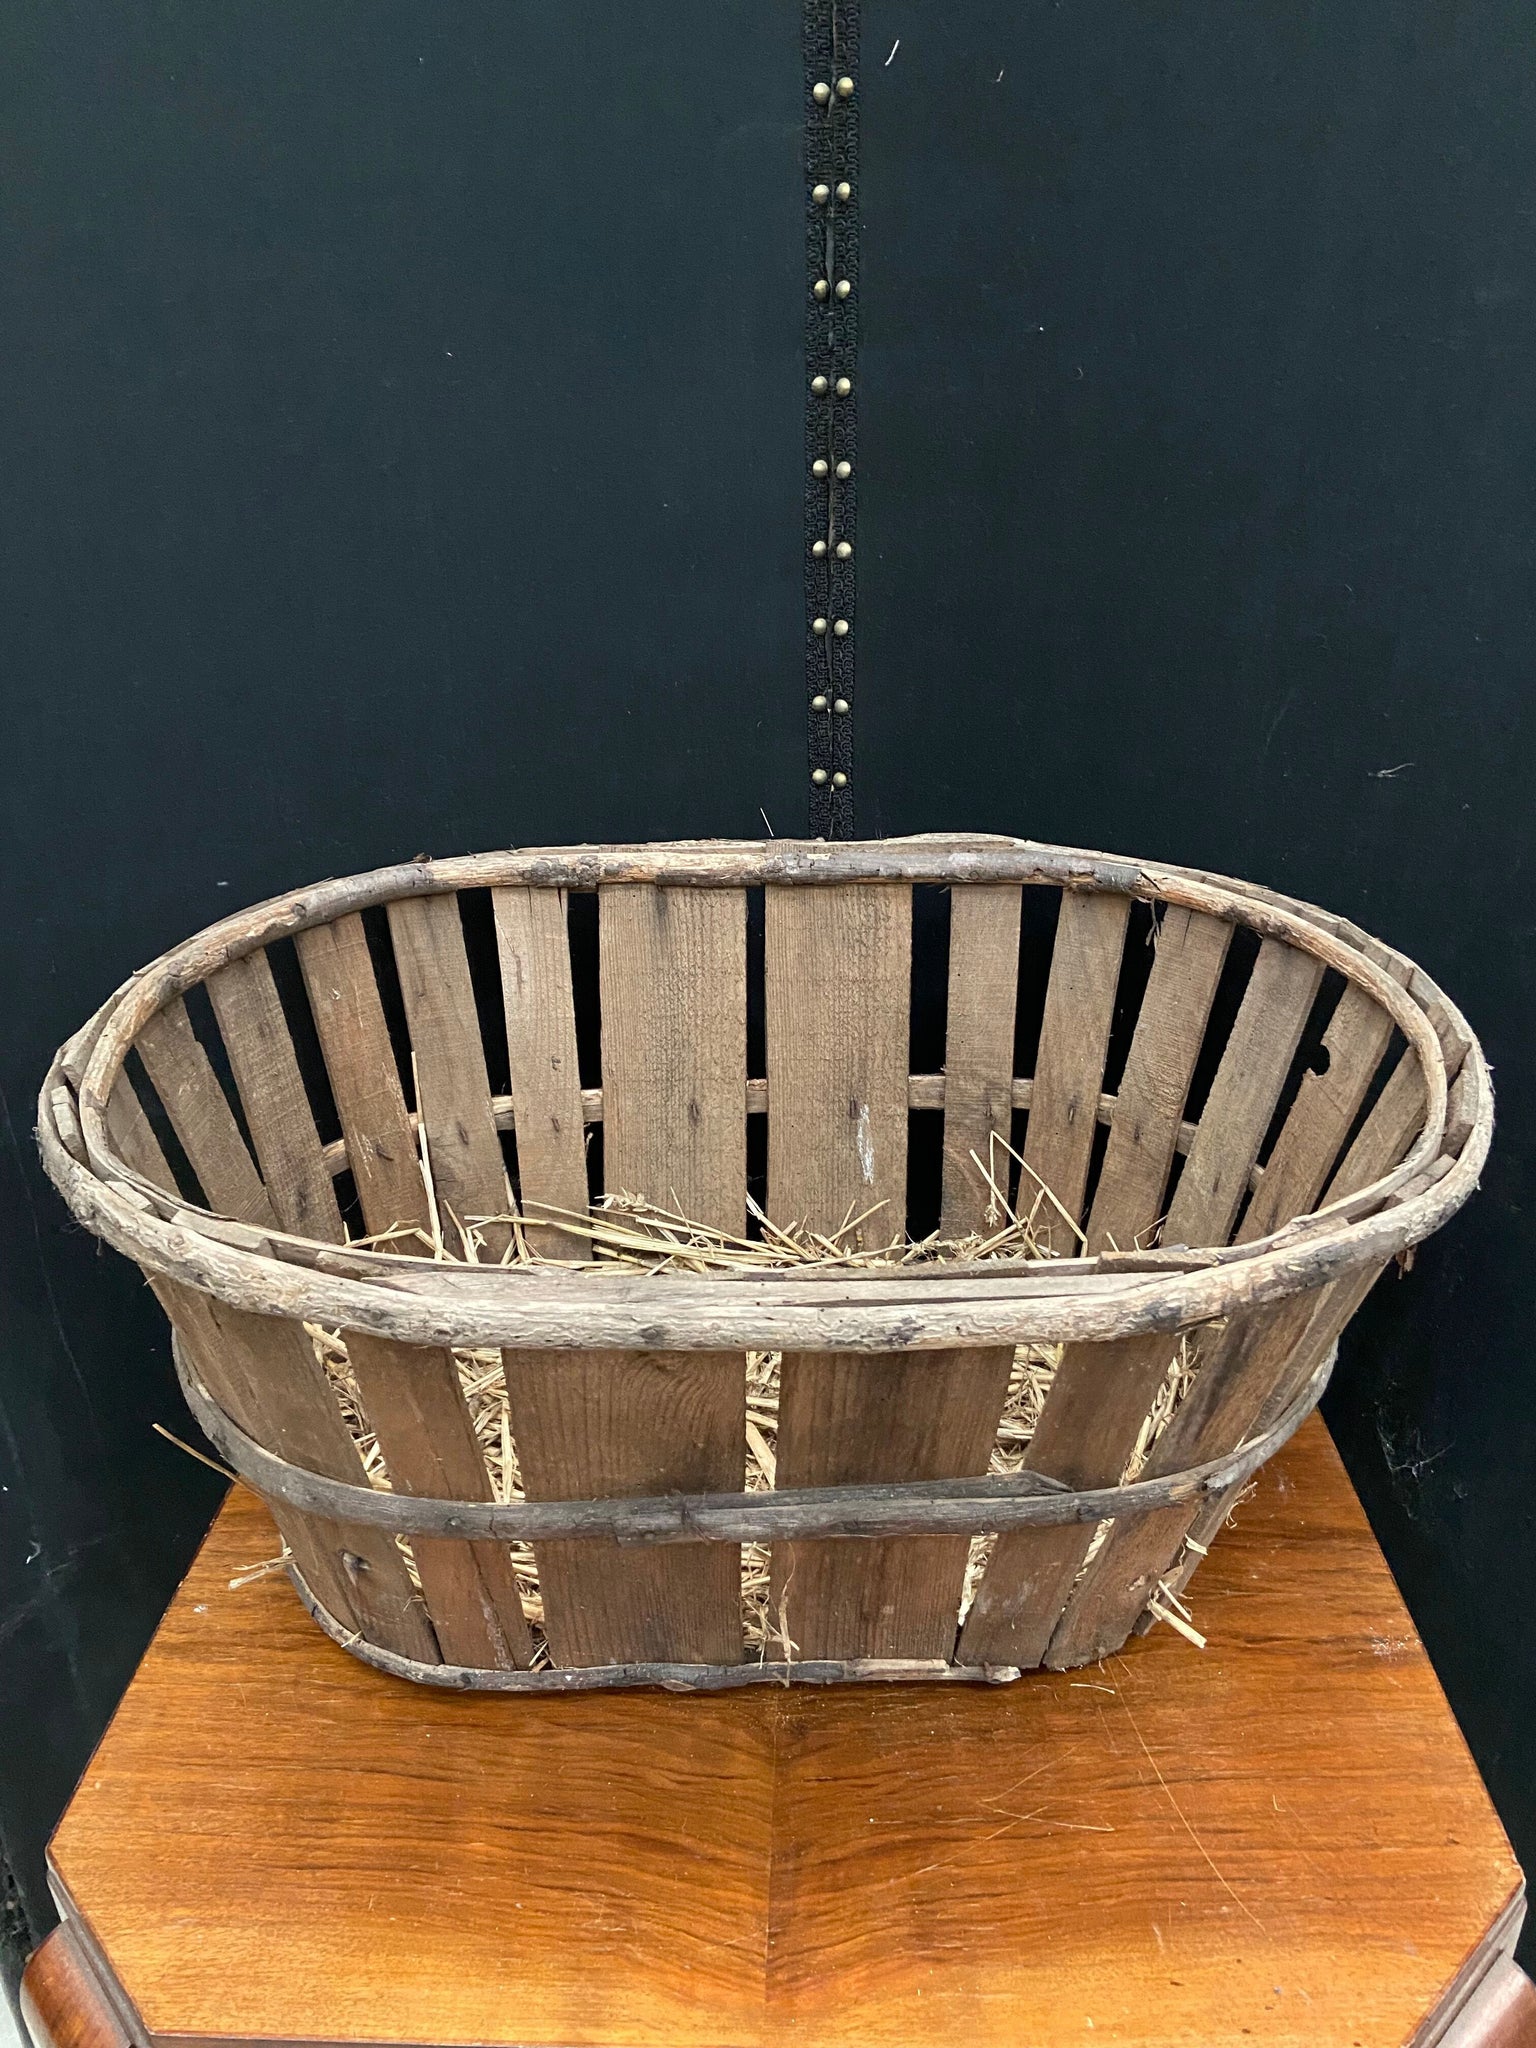 Slatted Basket Lined with Hay